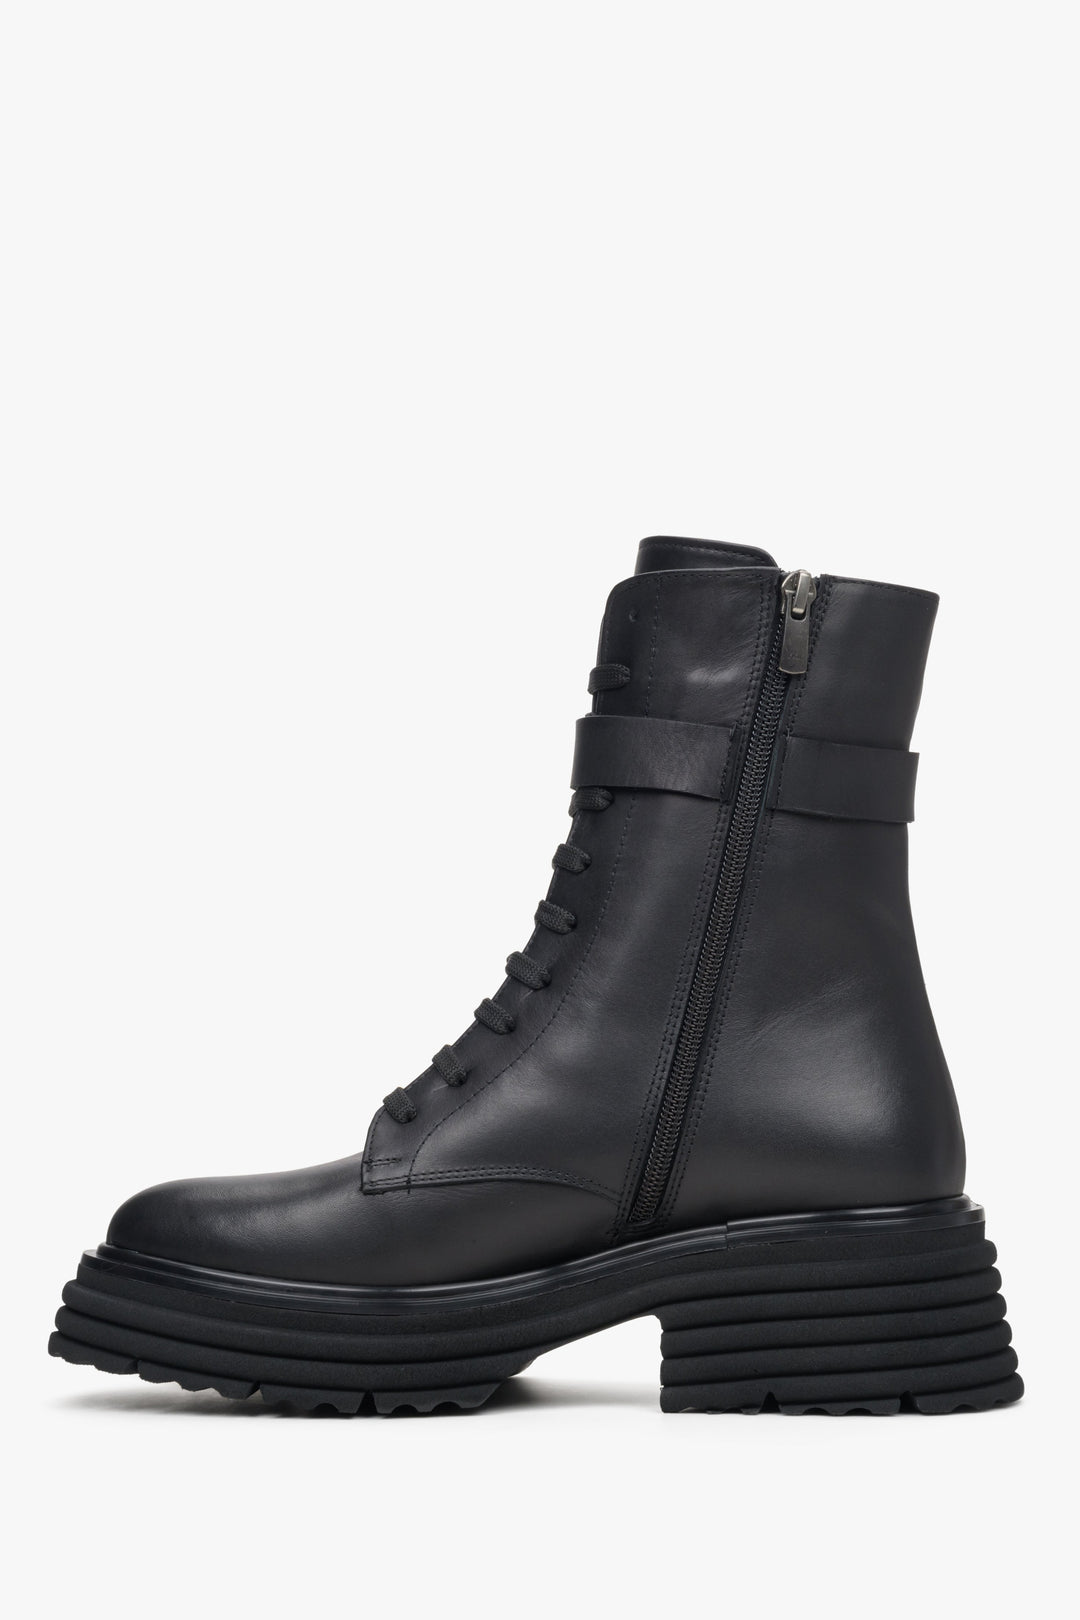 Women's black leather ankle boots - shoe profile.